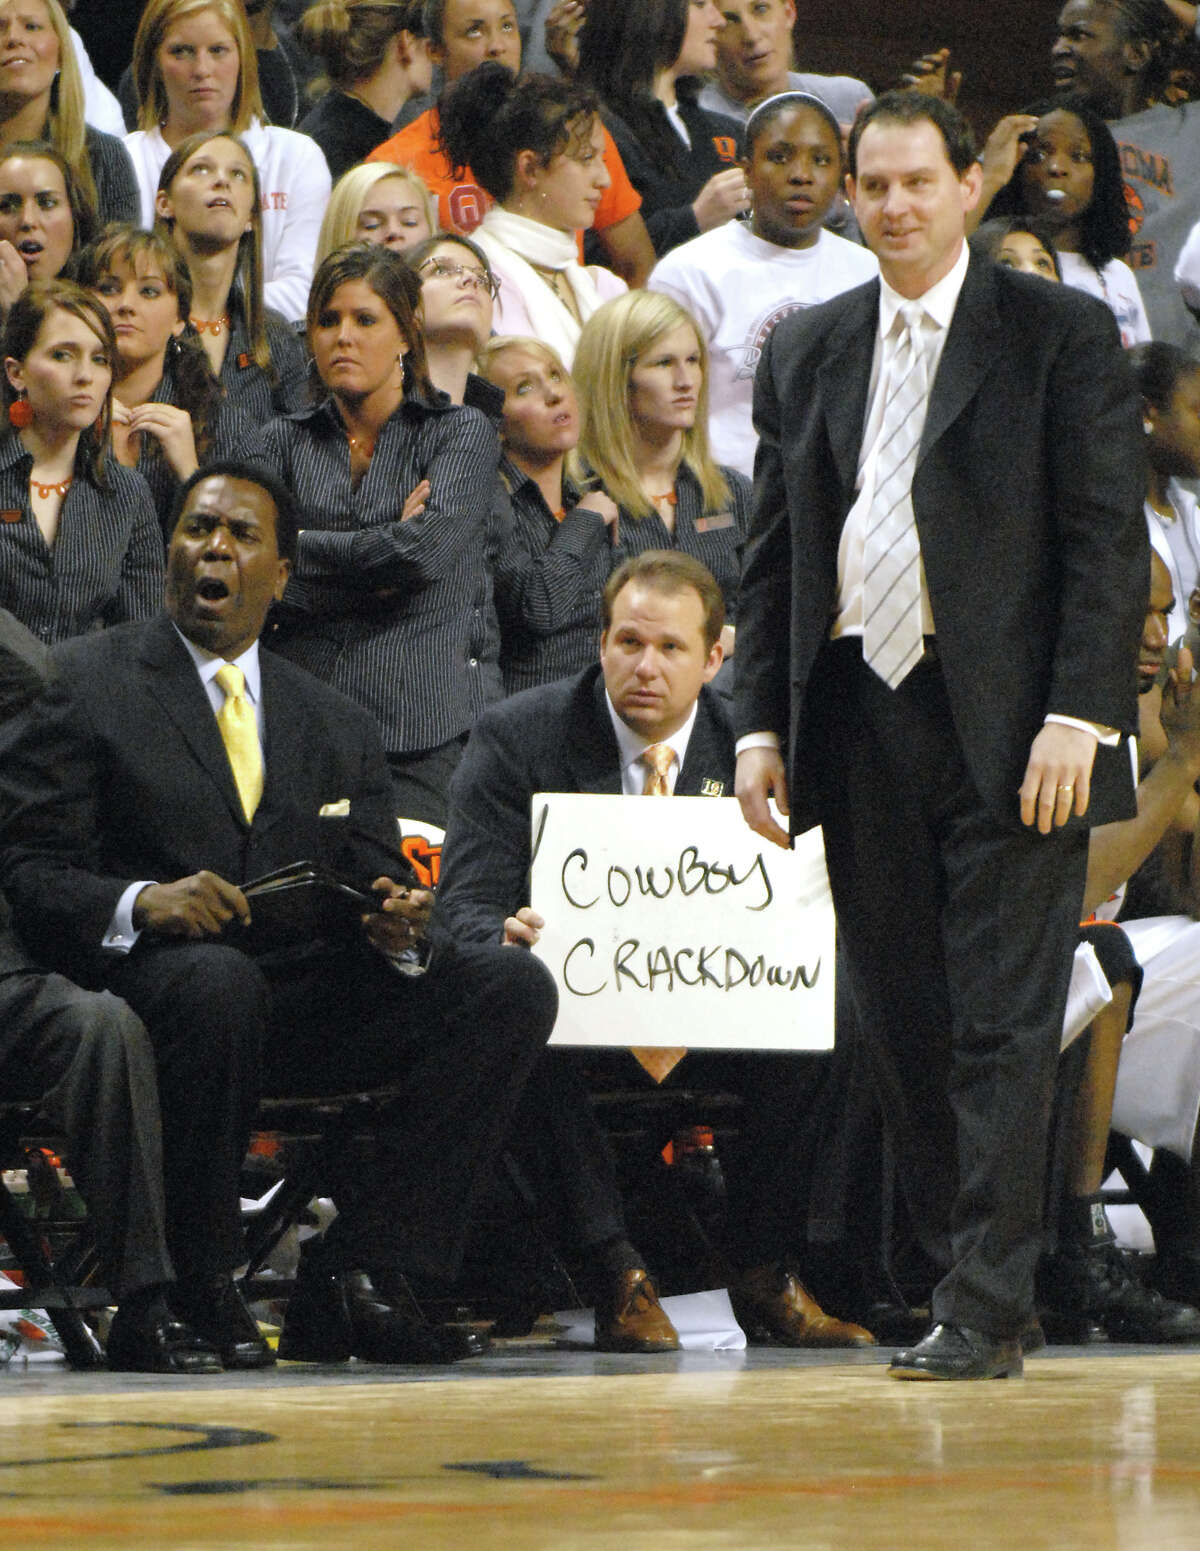 Oklahoma State assistant coach Kyle Keller, center, flanked by assistant coach Jimmy Williams, left, and head coach Sean Sutton, right, holds up a whiteboard for Oklahoma State players during overtime of an NCAA college basketball game in Stillwater, Okla., Tuesday, Jan. 16, 2007. Oklahoma State defeated Texas in triple overtime 105-103.(AP Photo/Brody Schmidt)